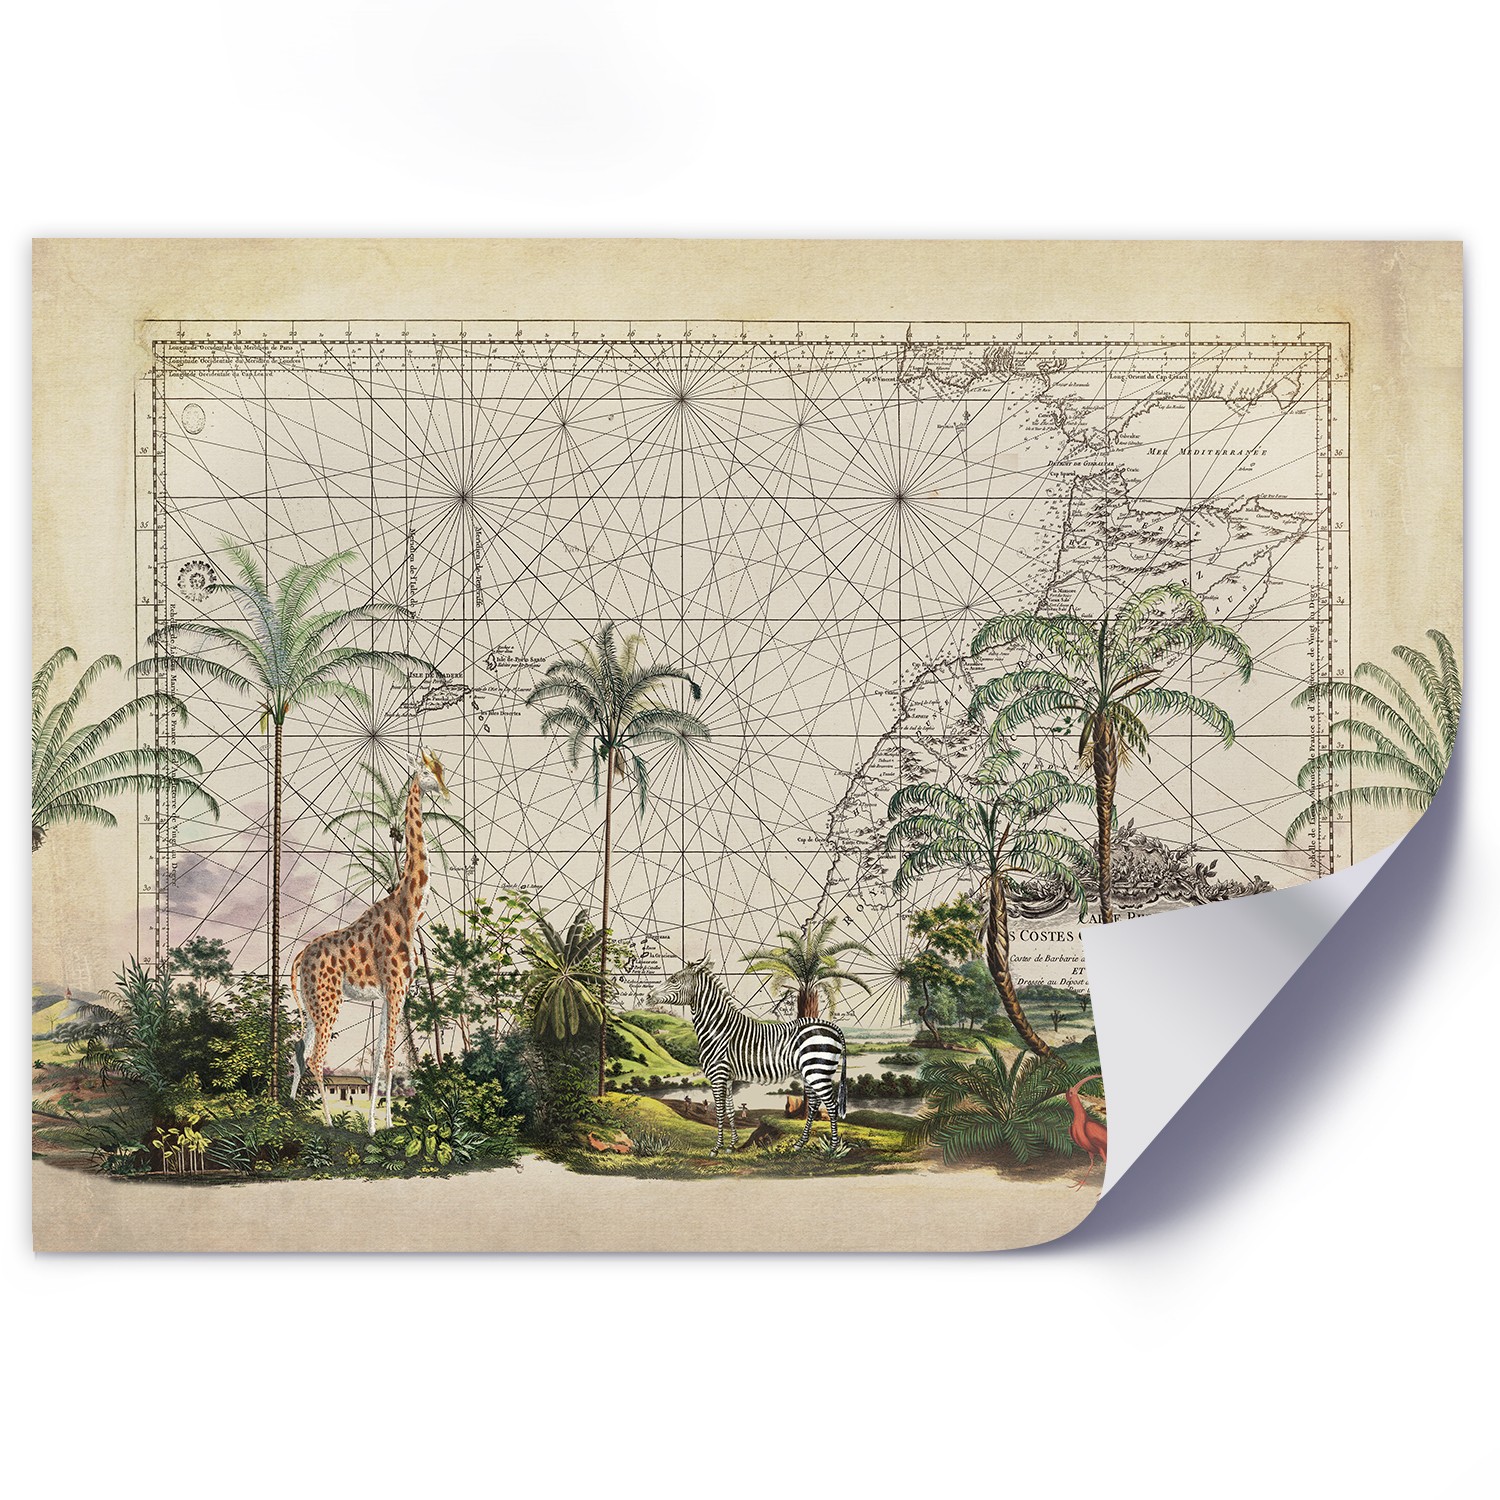 Historical map and tropical plants and animals